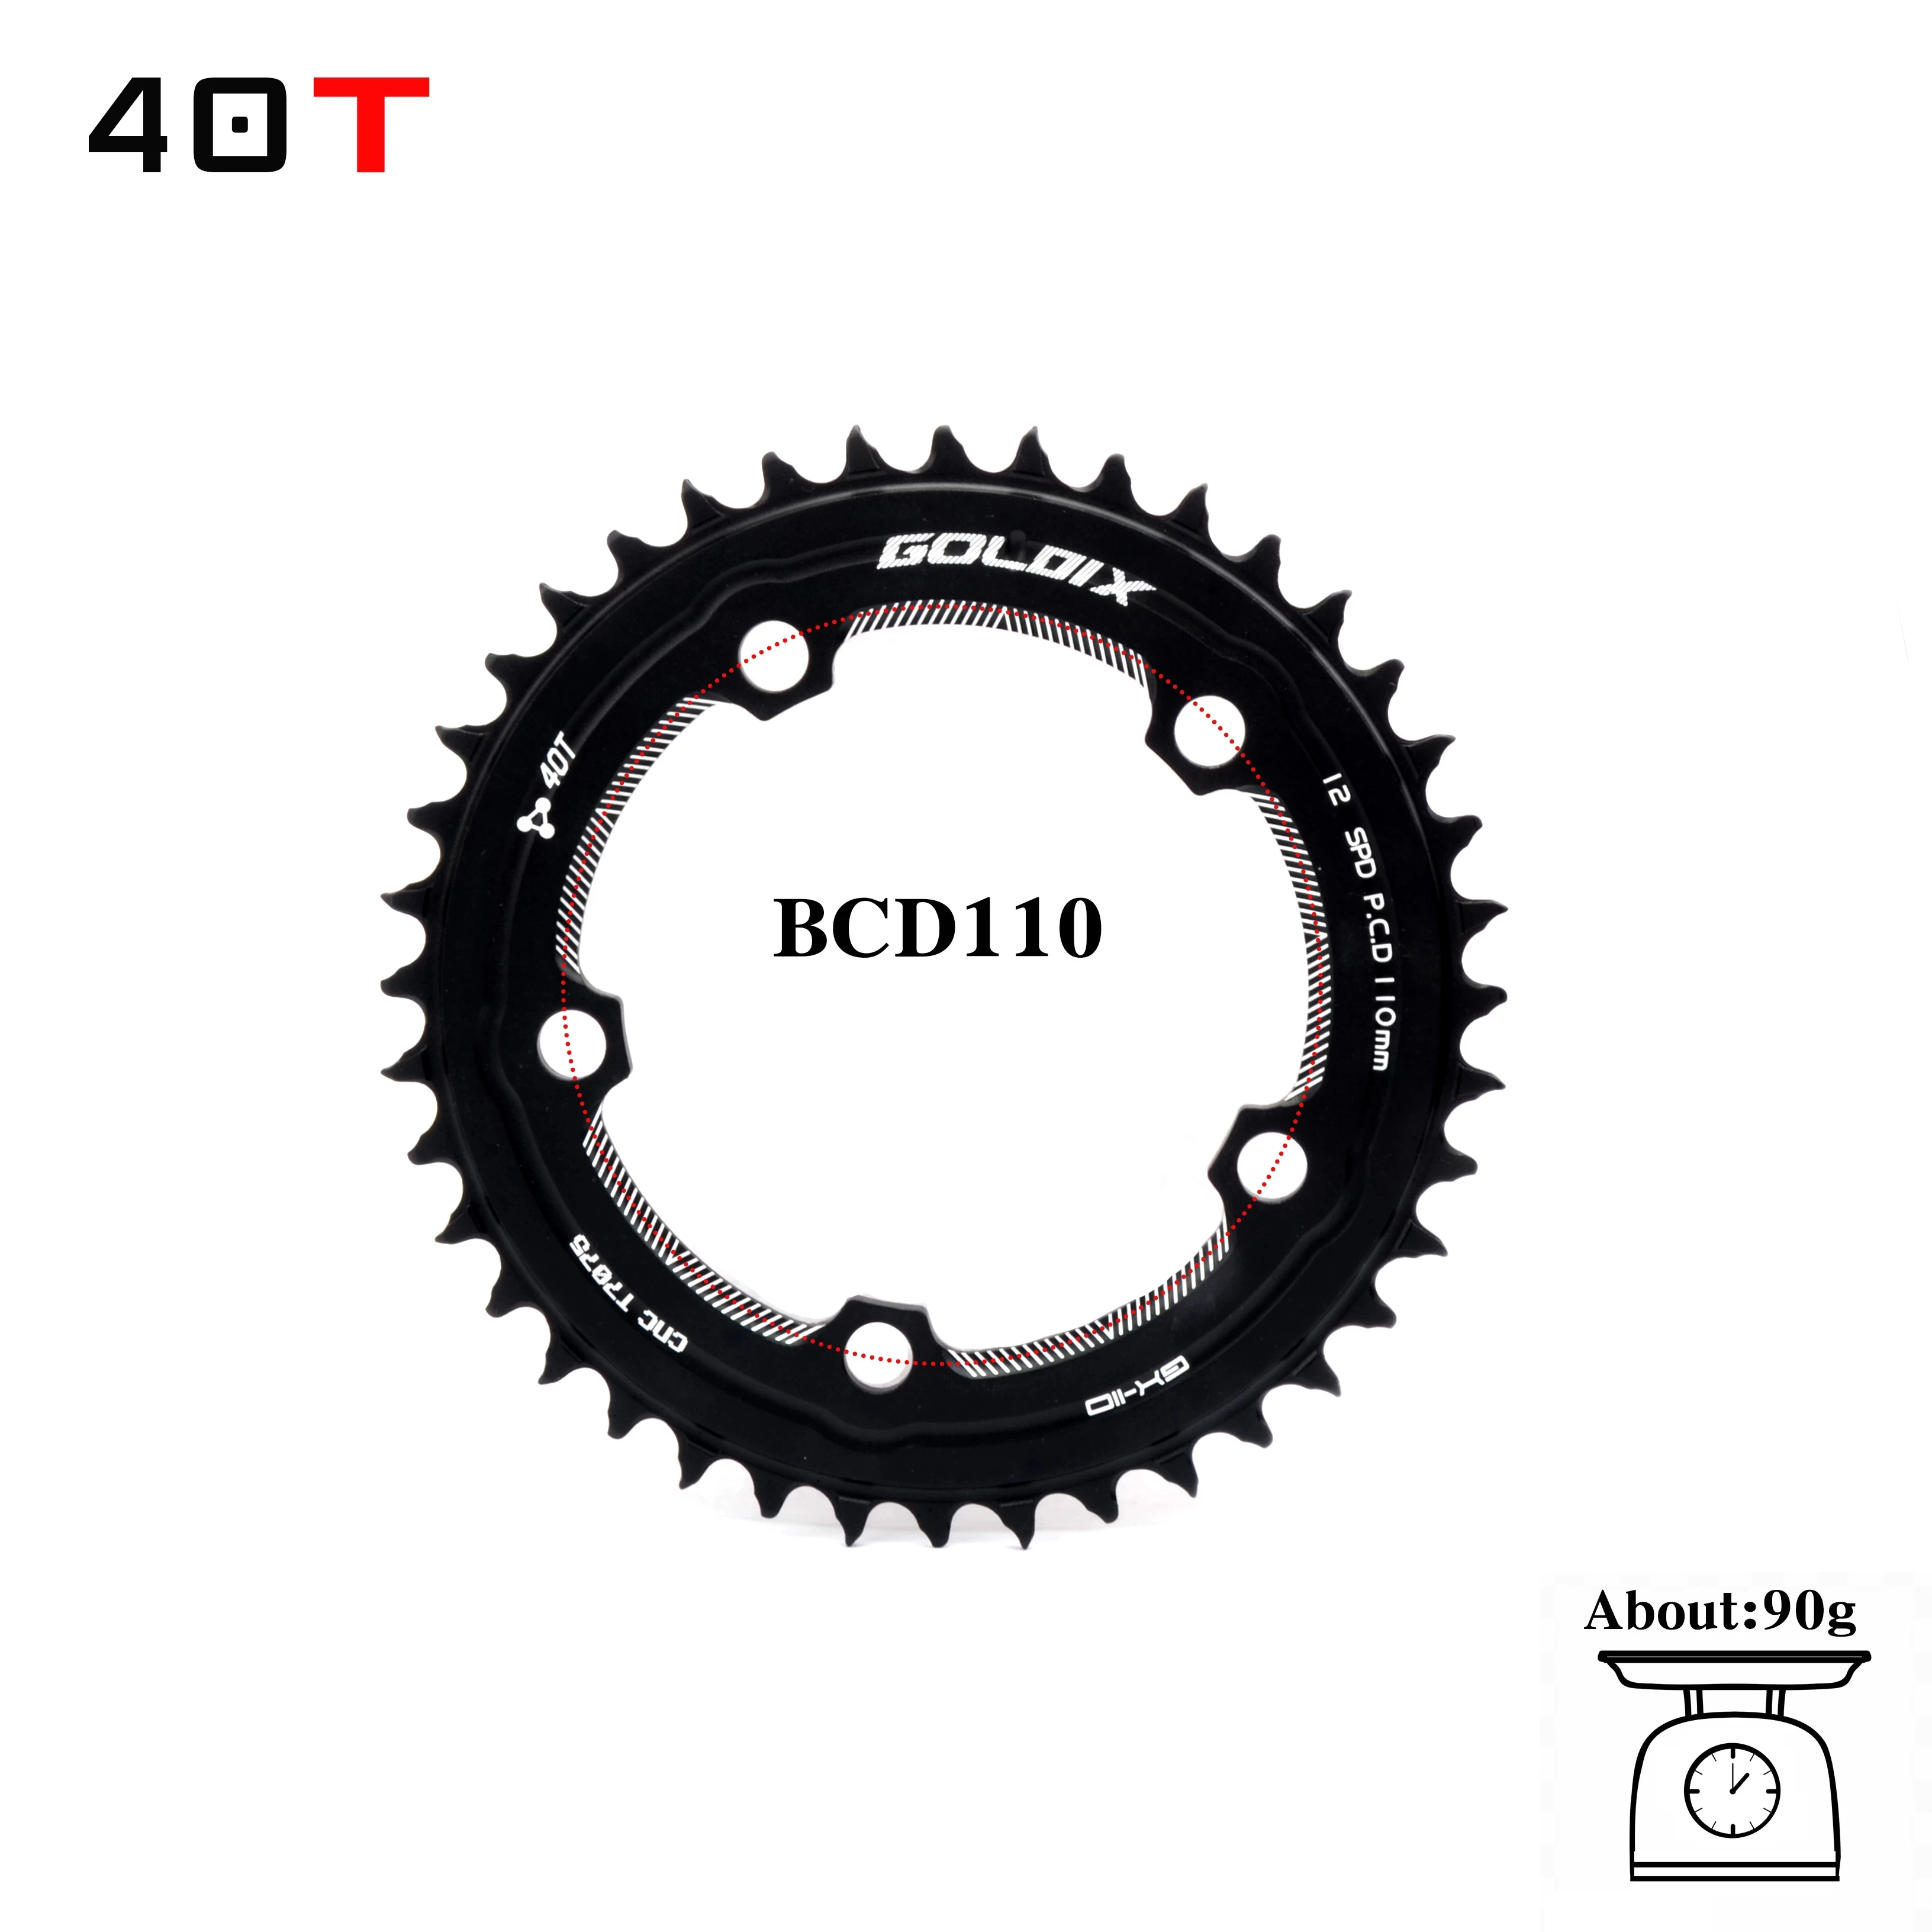 5 BCD 110BCD Road Bike Narrow Wide Chainring Bike Chainwheel 50-58t Details about   110